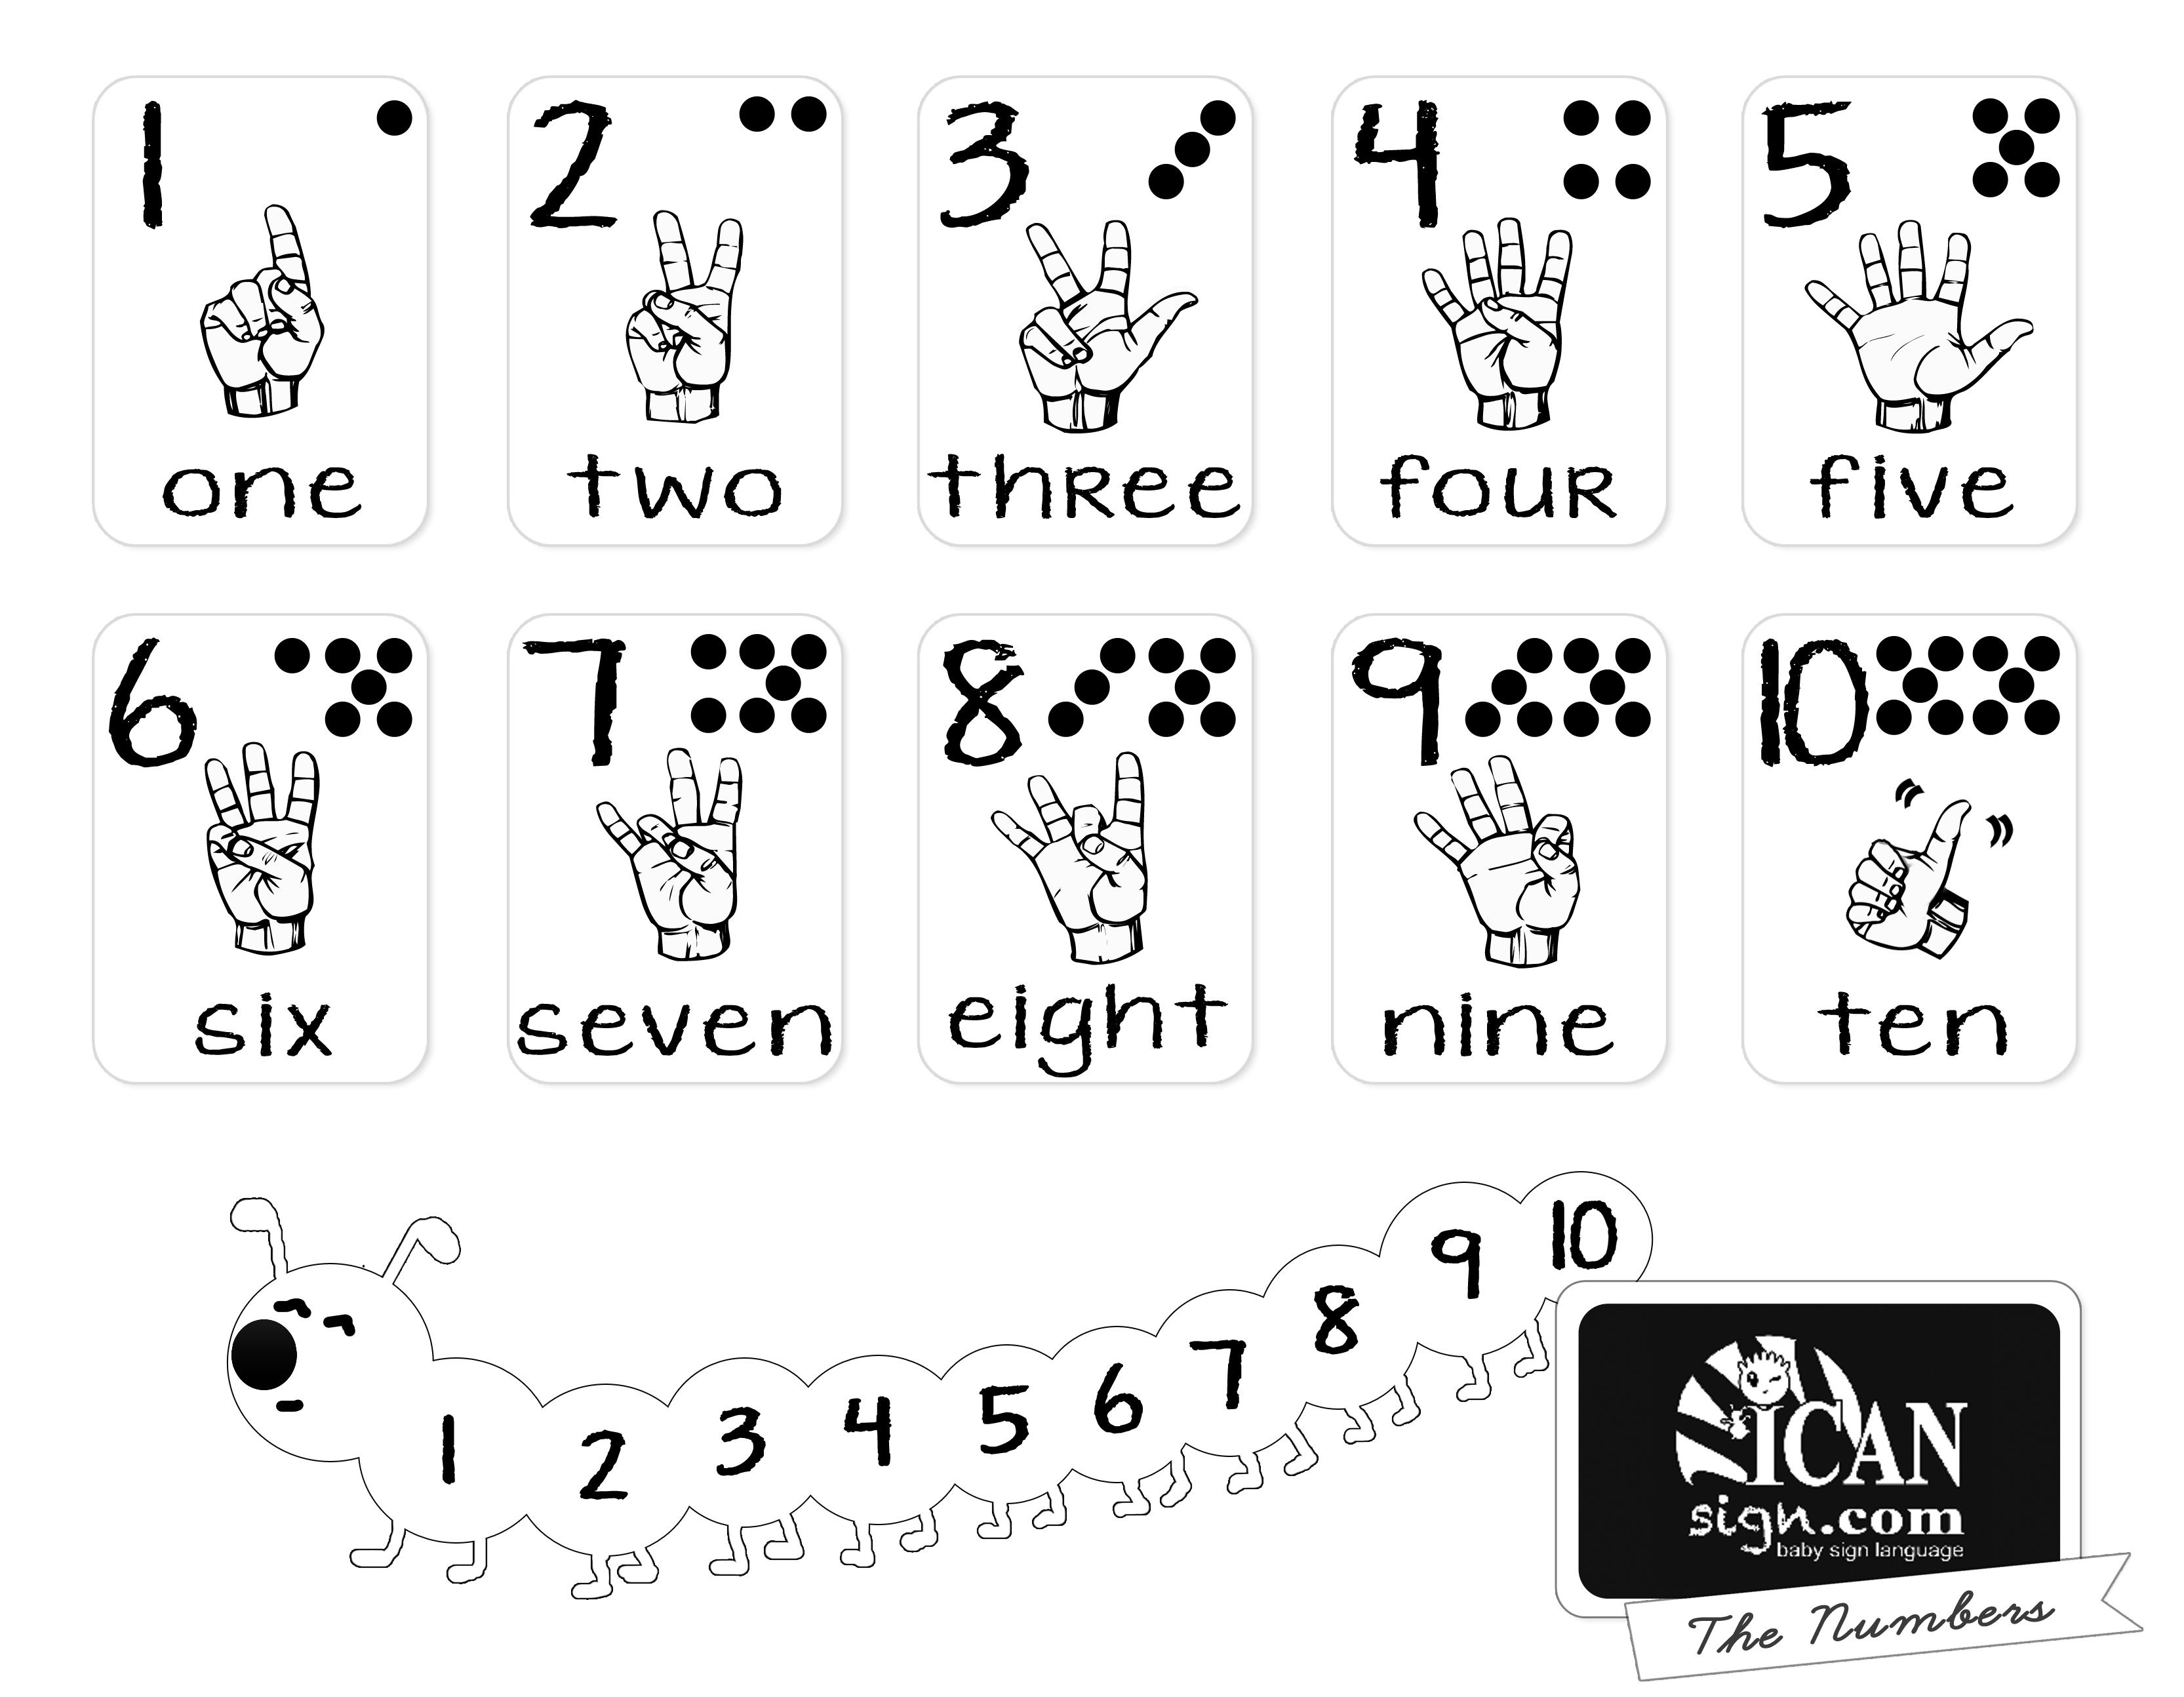 Printer-Friendly Asl Numbers Chart - Free Printable From Icansign - Free Printable American Sign Language Alphabet